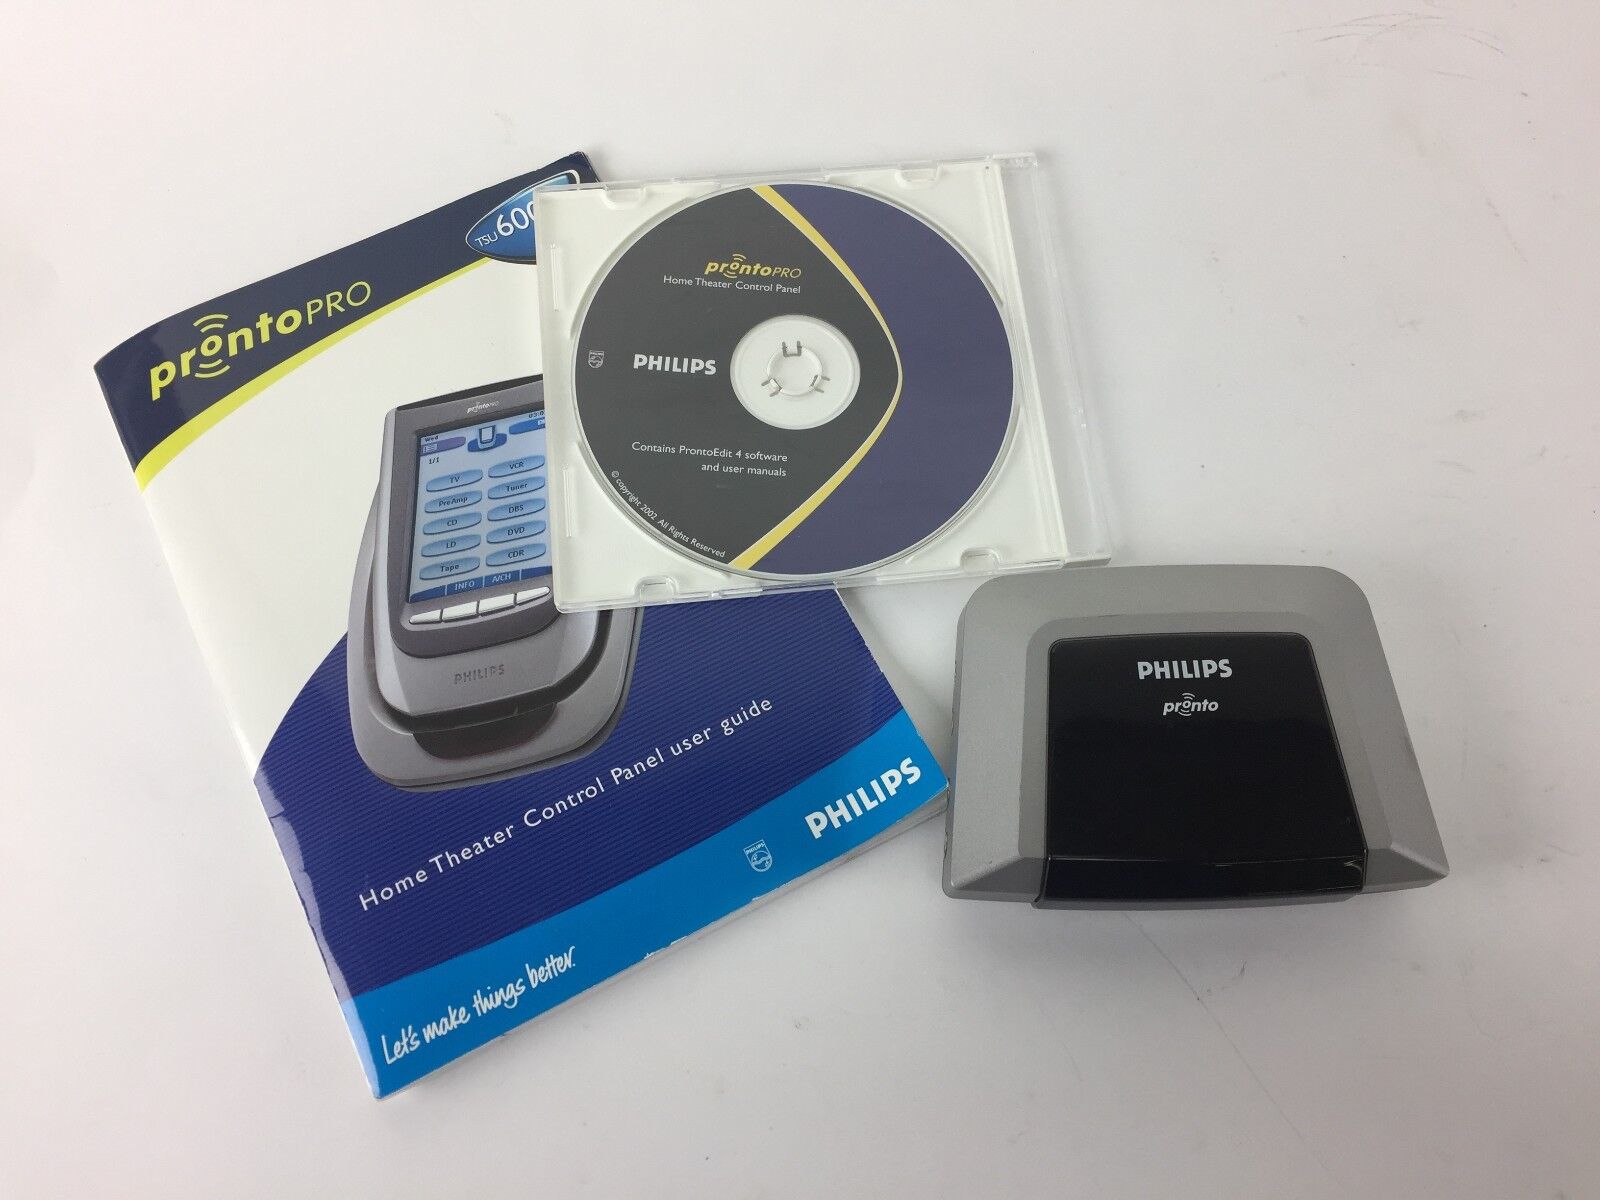 Philips Pronto RFX6000/01,CD of Software and Manual and User Guide Book Included